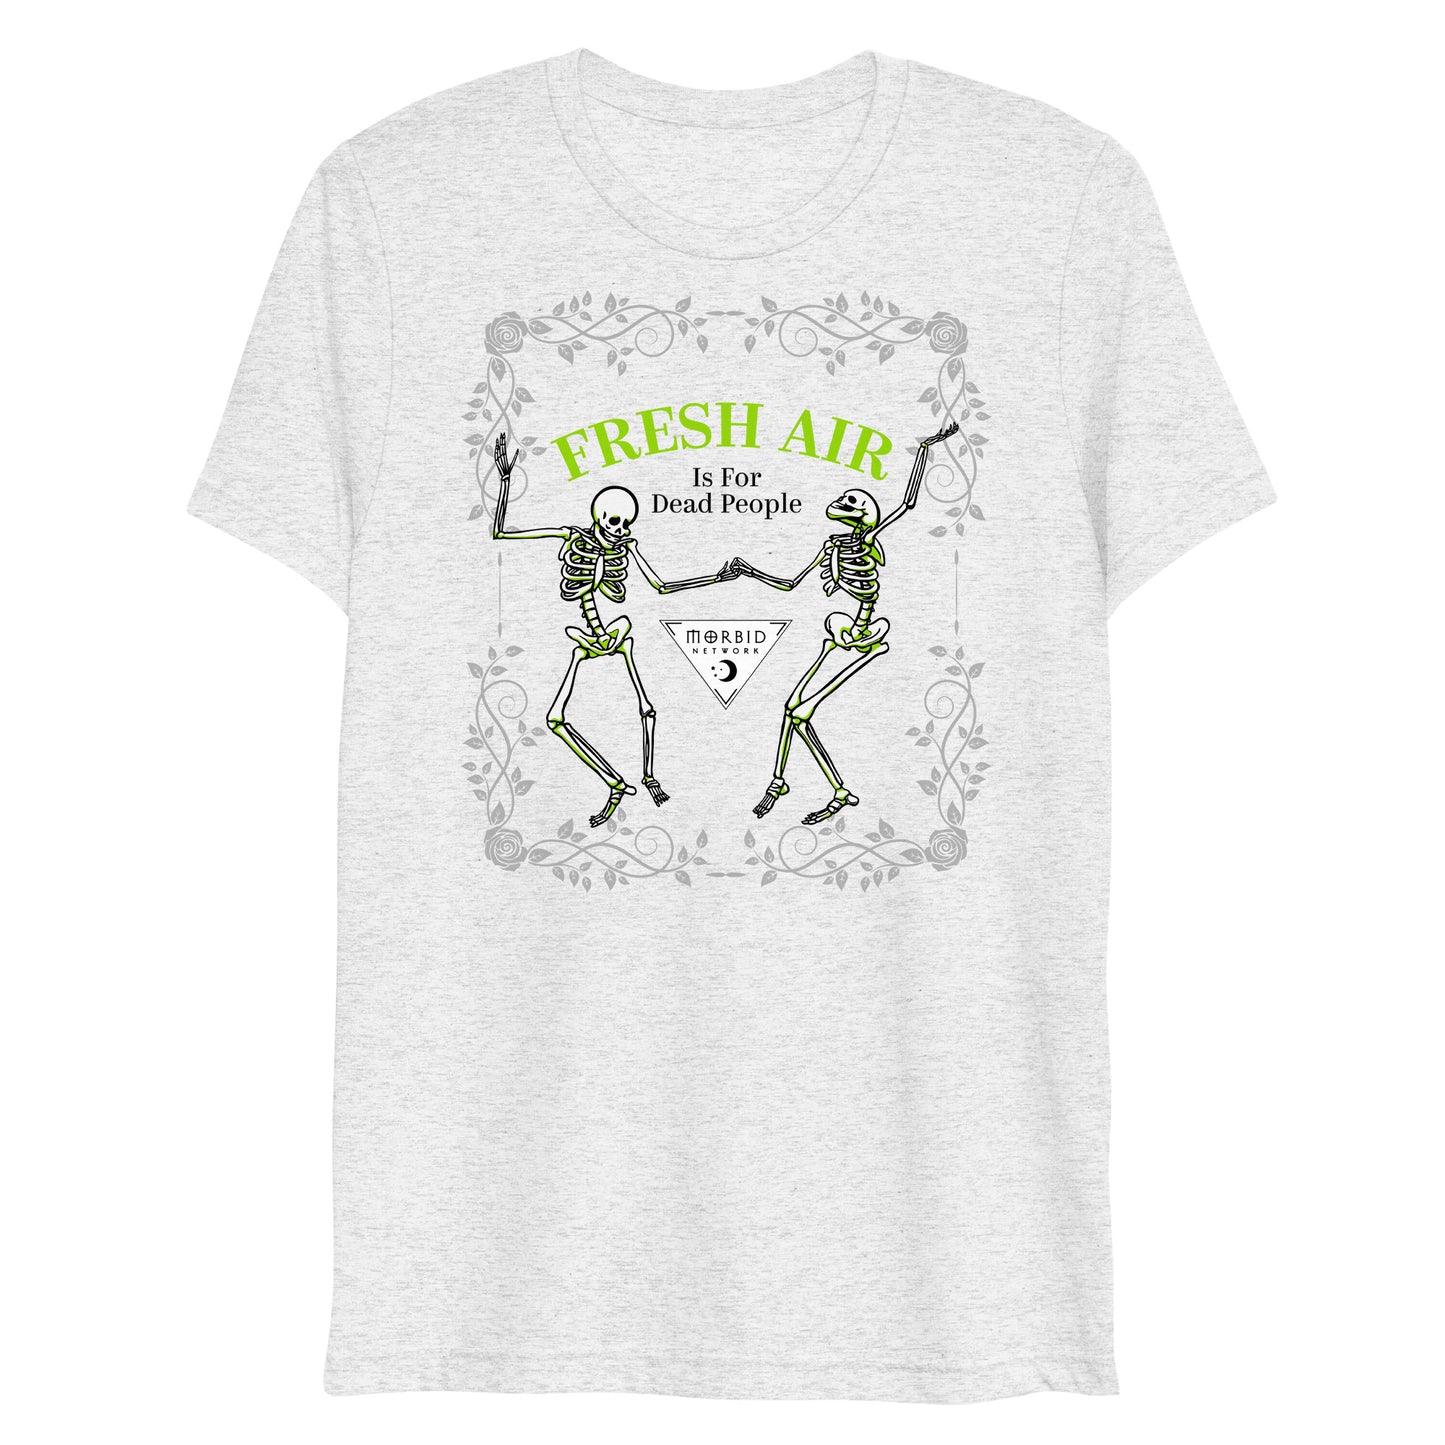 Morbid Fresh Air Is For Dead People Adult T-Shirt